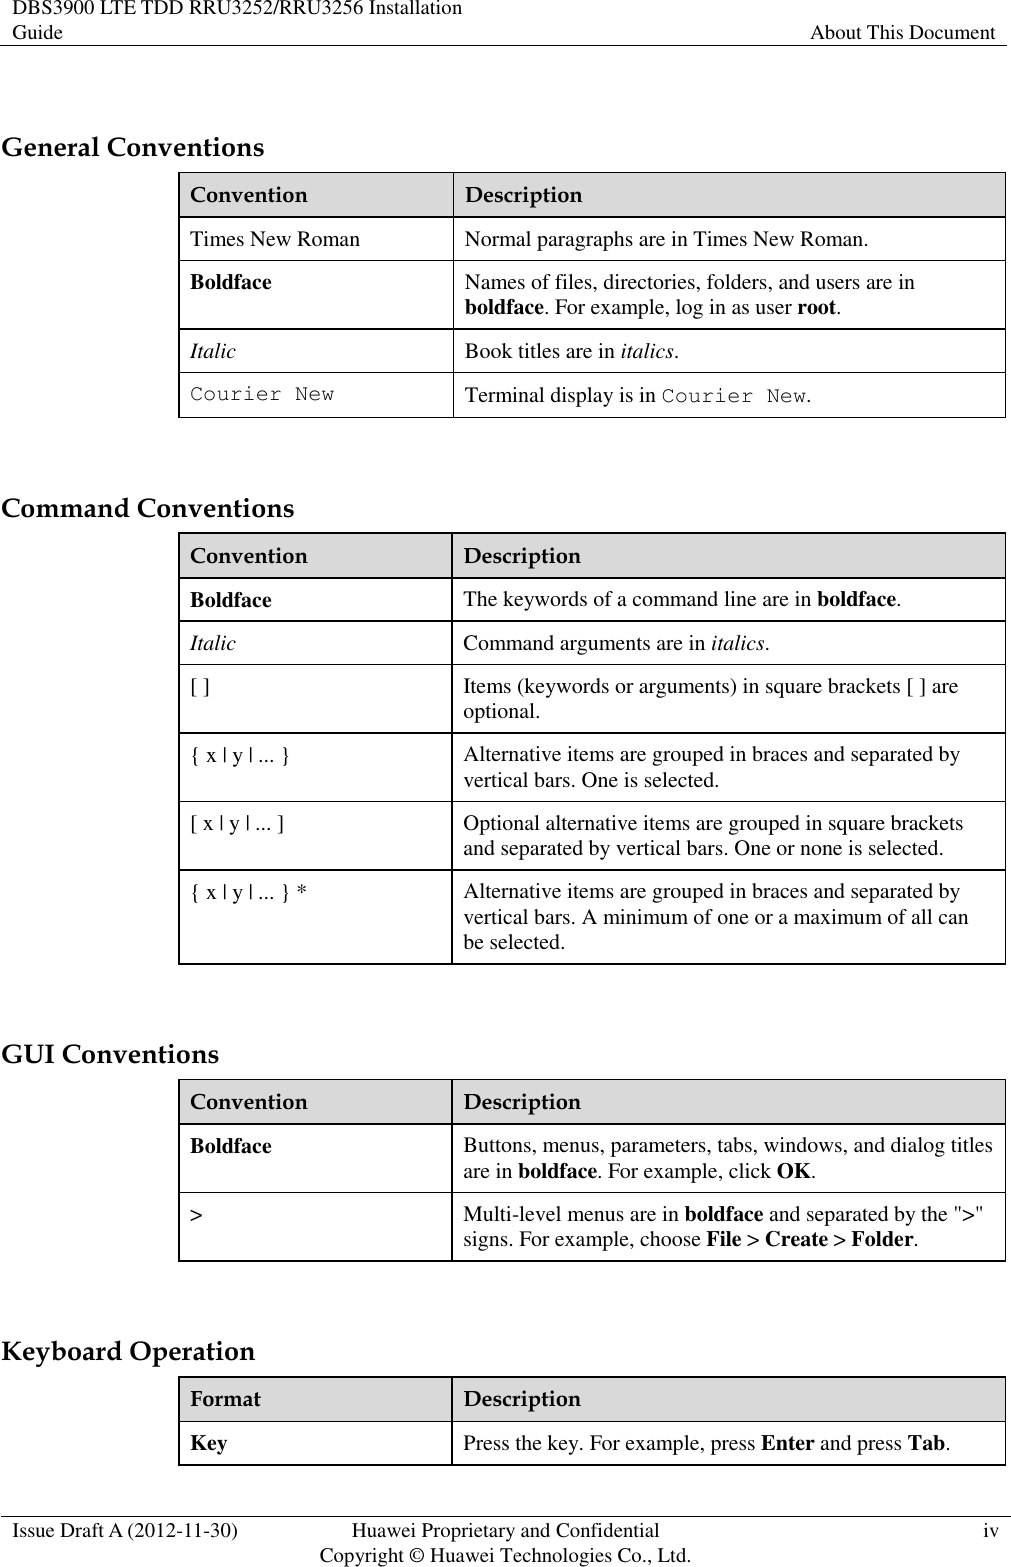 DBS3900 LTE TDD RRU3252/RRU3256 Installation Guide About This Document  Issue Draft A (2012-11-30) Huawei Proprietary and Confidential                                     Copyright © Huawei Technologies Co., Ltd. iv   General Conventions Convention Description Times New Roman Normal paragraphs are in Times New Roman. Boldface Names of files, directories, folders, and users are in boldface. For example, log in as user root. Italic Book titles are in italics. Courier New Terminal display is in Courier New.  Command Conventions Convention Description Boldface The keywords of a command line are in boldface. Italic Command arguments are in italics. [ ] Items (keywords or arguments) in square brackets [ ] are optional. { x | y | ... } Alternative items are grouped in braces and separated by vertical bars. One is selected. [ x | y | ... ] Optional alternative items are grouped in square brackets and separated by vertical bars. One or none is selected. { x | y | ... } * Alternative items are grouped in braces and separated by vertical bars. A minimum of one or a maximum of all can be selected.  GUI Conventions Convention Description Boldface Buttons, menus, parameters, tabs, windows, and dialog titles are in boldface. For example, click OK. &gt; Multi-level menus are in boldface and separated by the &quot;&gt;&quot; signs. For example, choose File &gt; Create &gt; Folder.  Keyboard Operation Format Description Key Press the key. For example, press Enter and press Tab. 